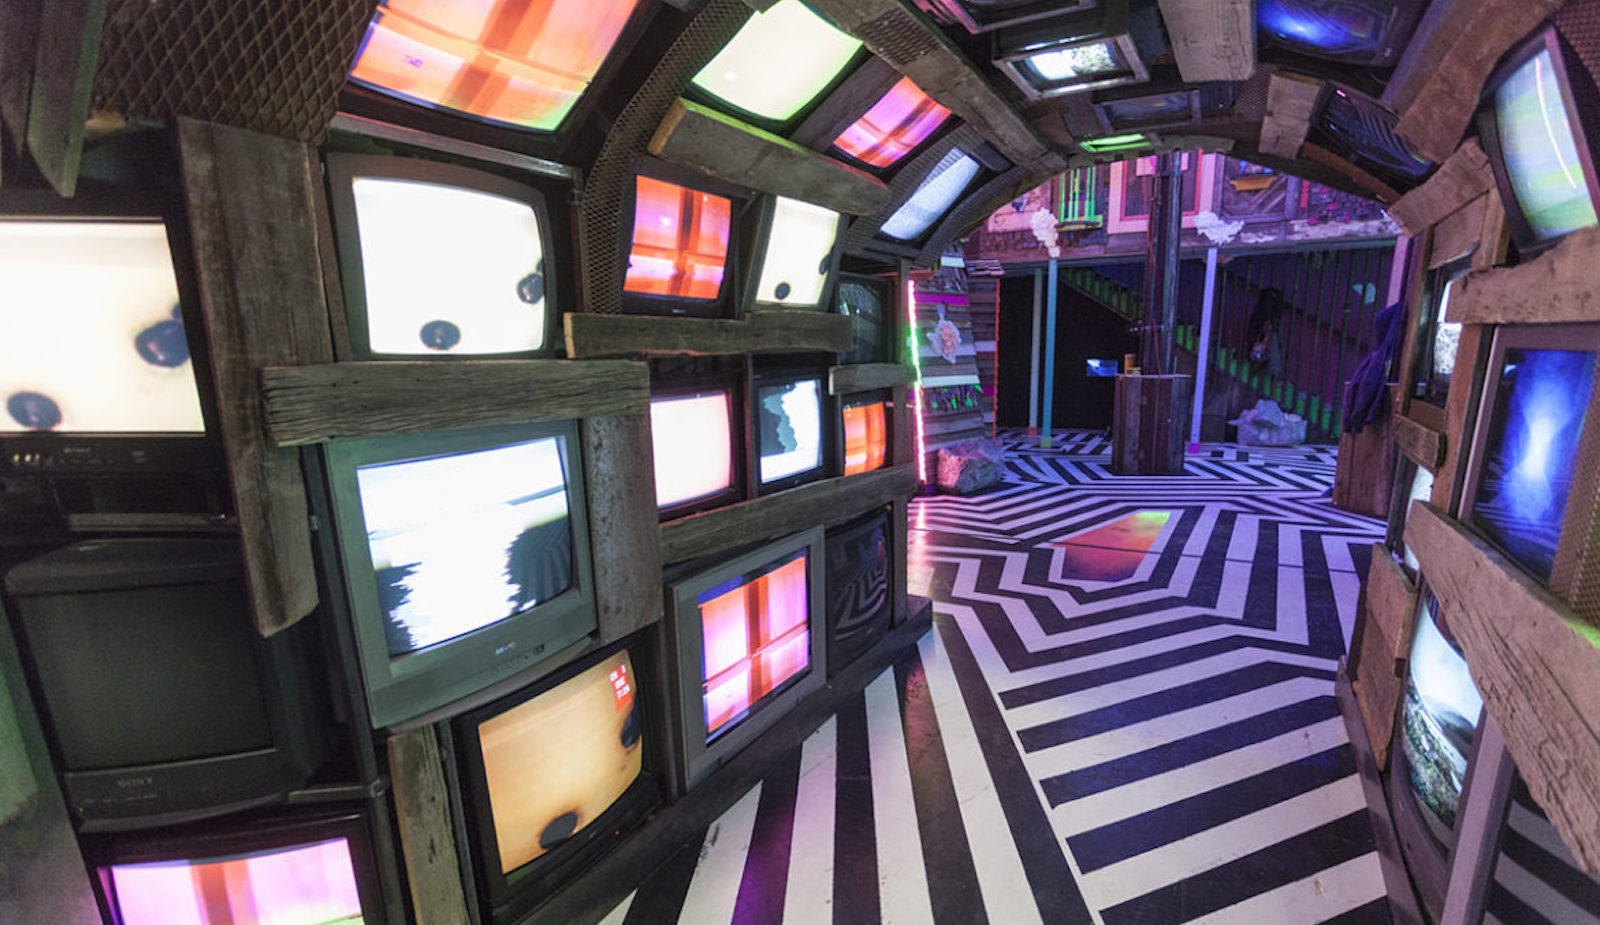 meow wolf story